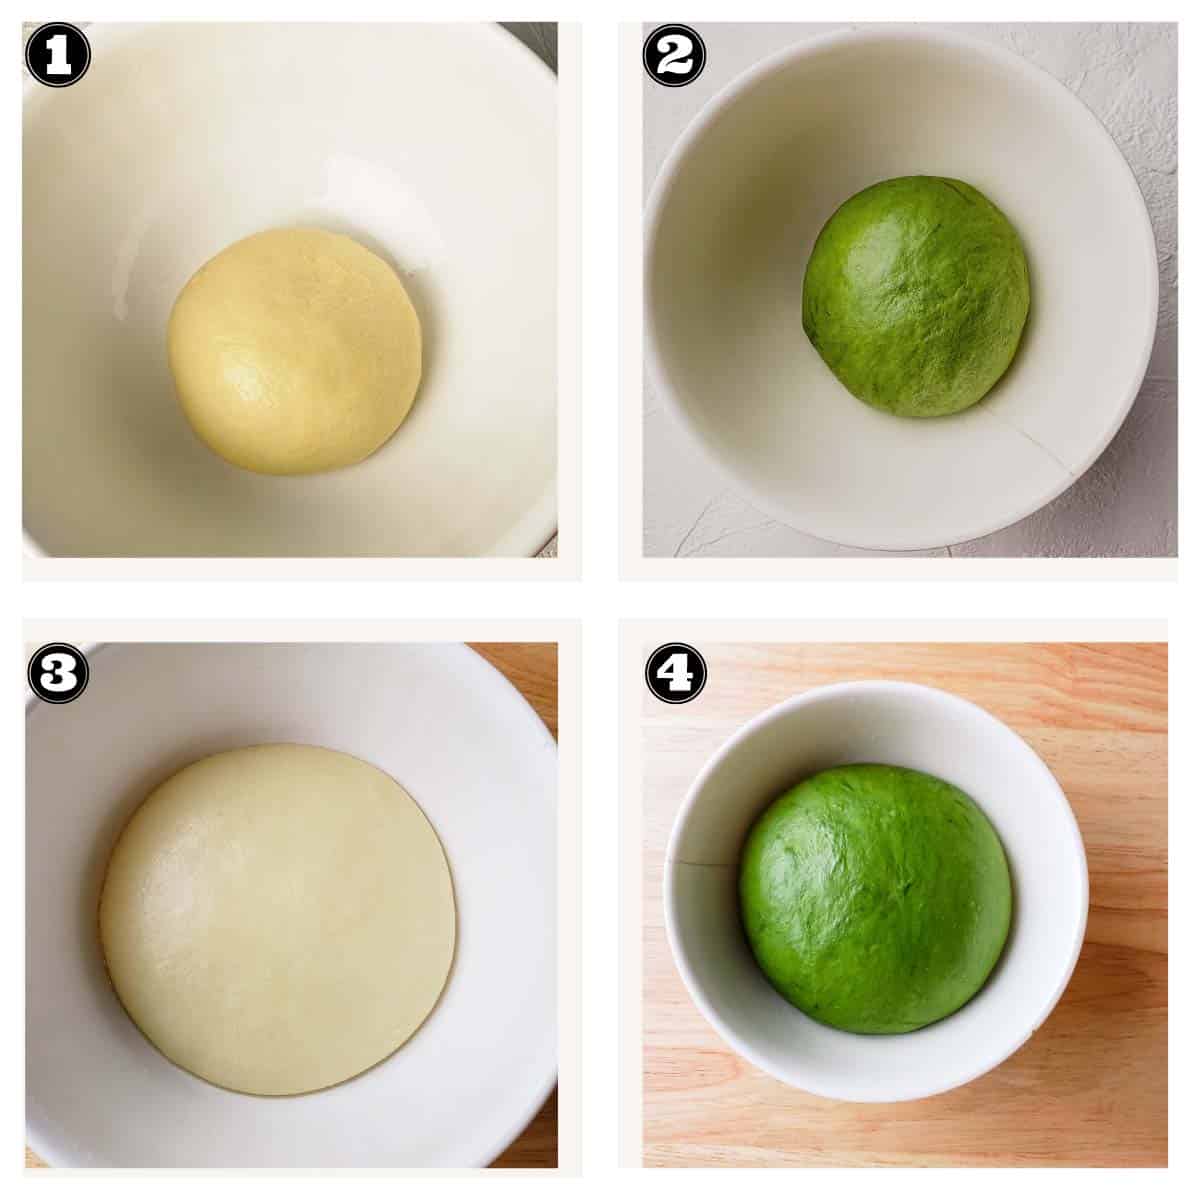 images showing process of proofing two types of dough